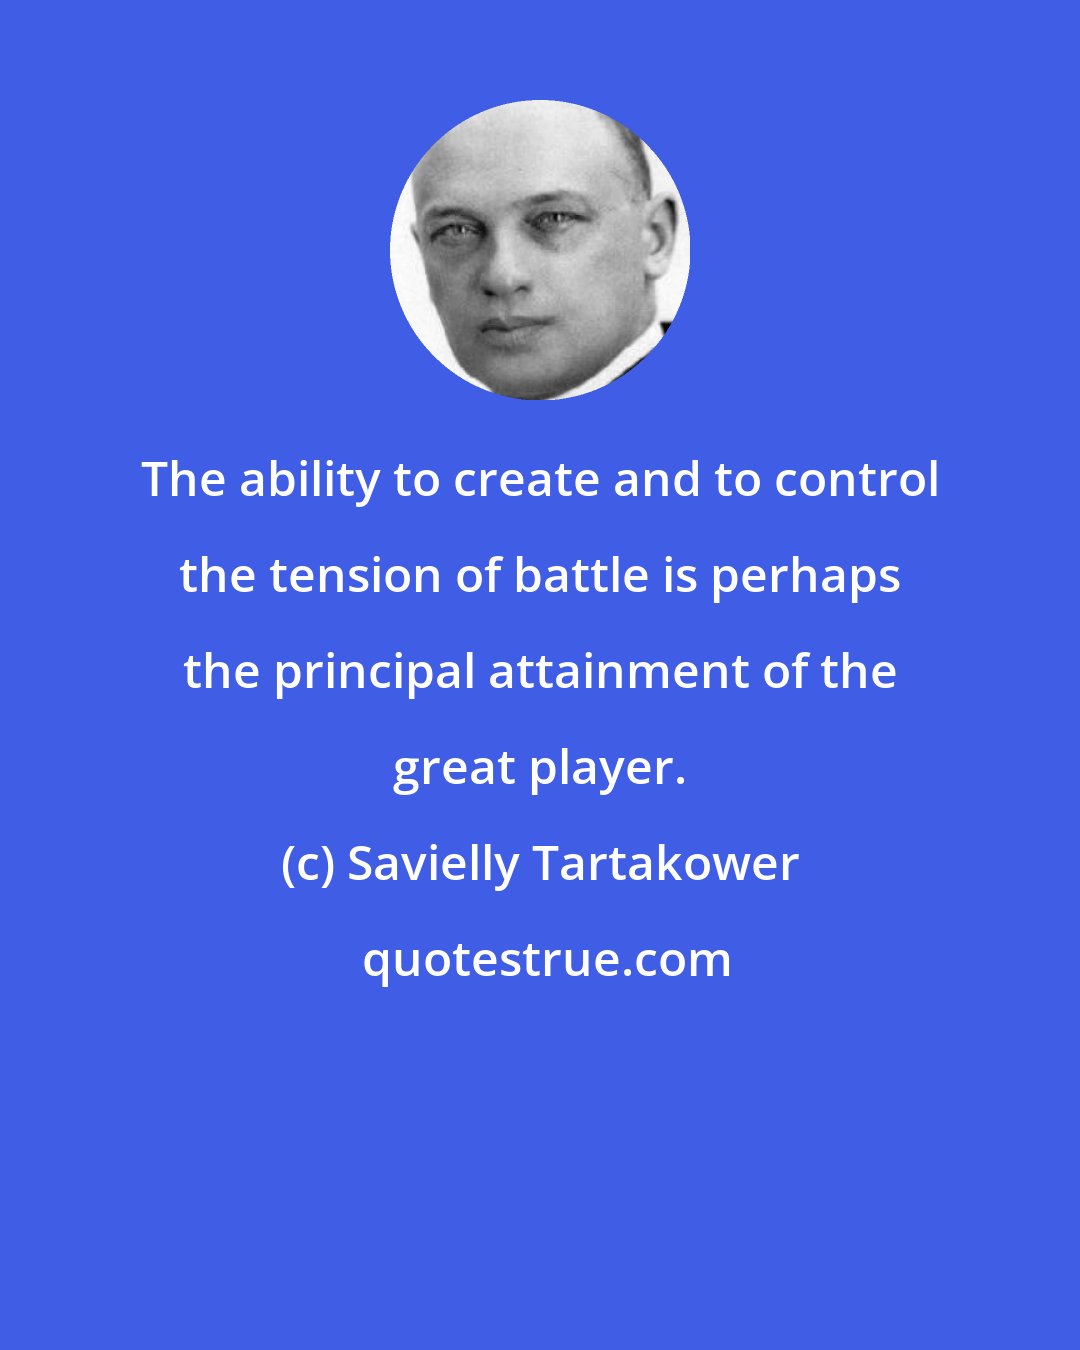 Savielly Tartakower: The ability to create and to control the tension of battle is perhaps the principal attainment of the great player.